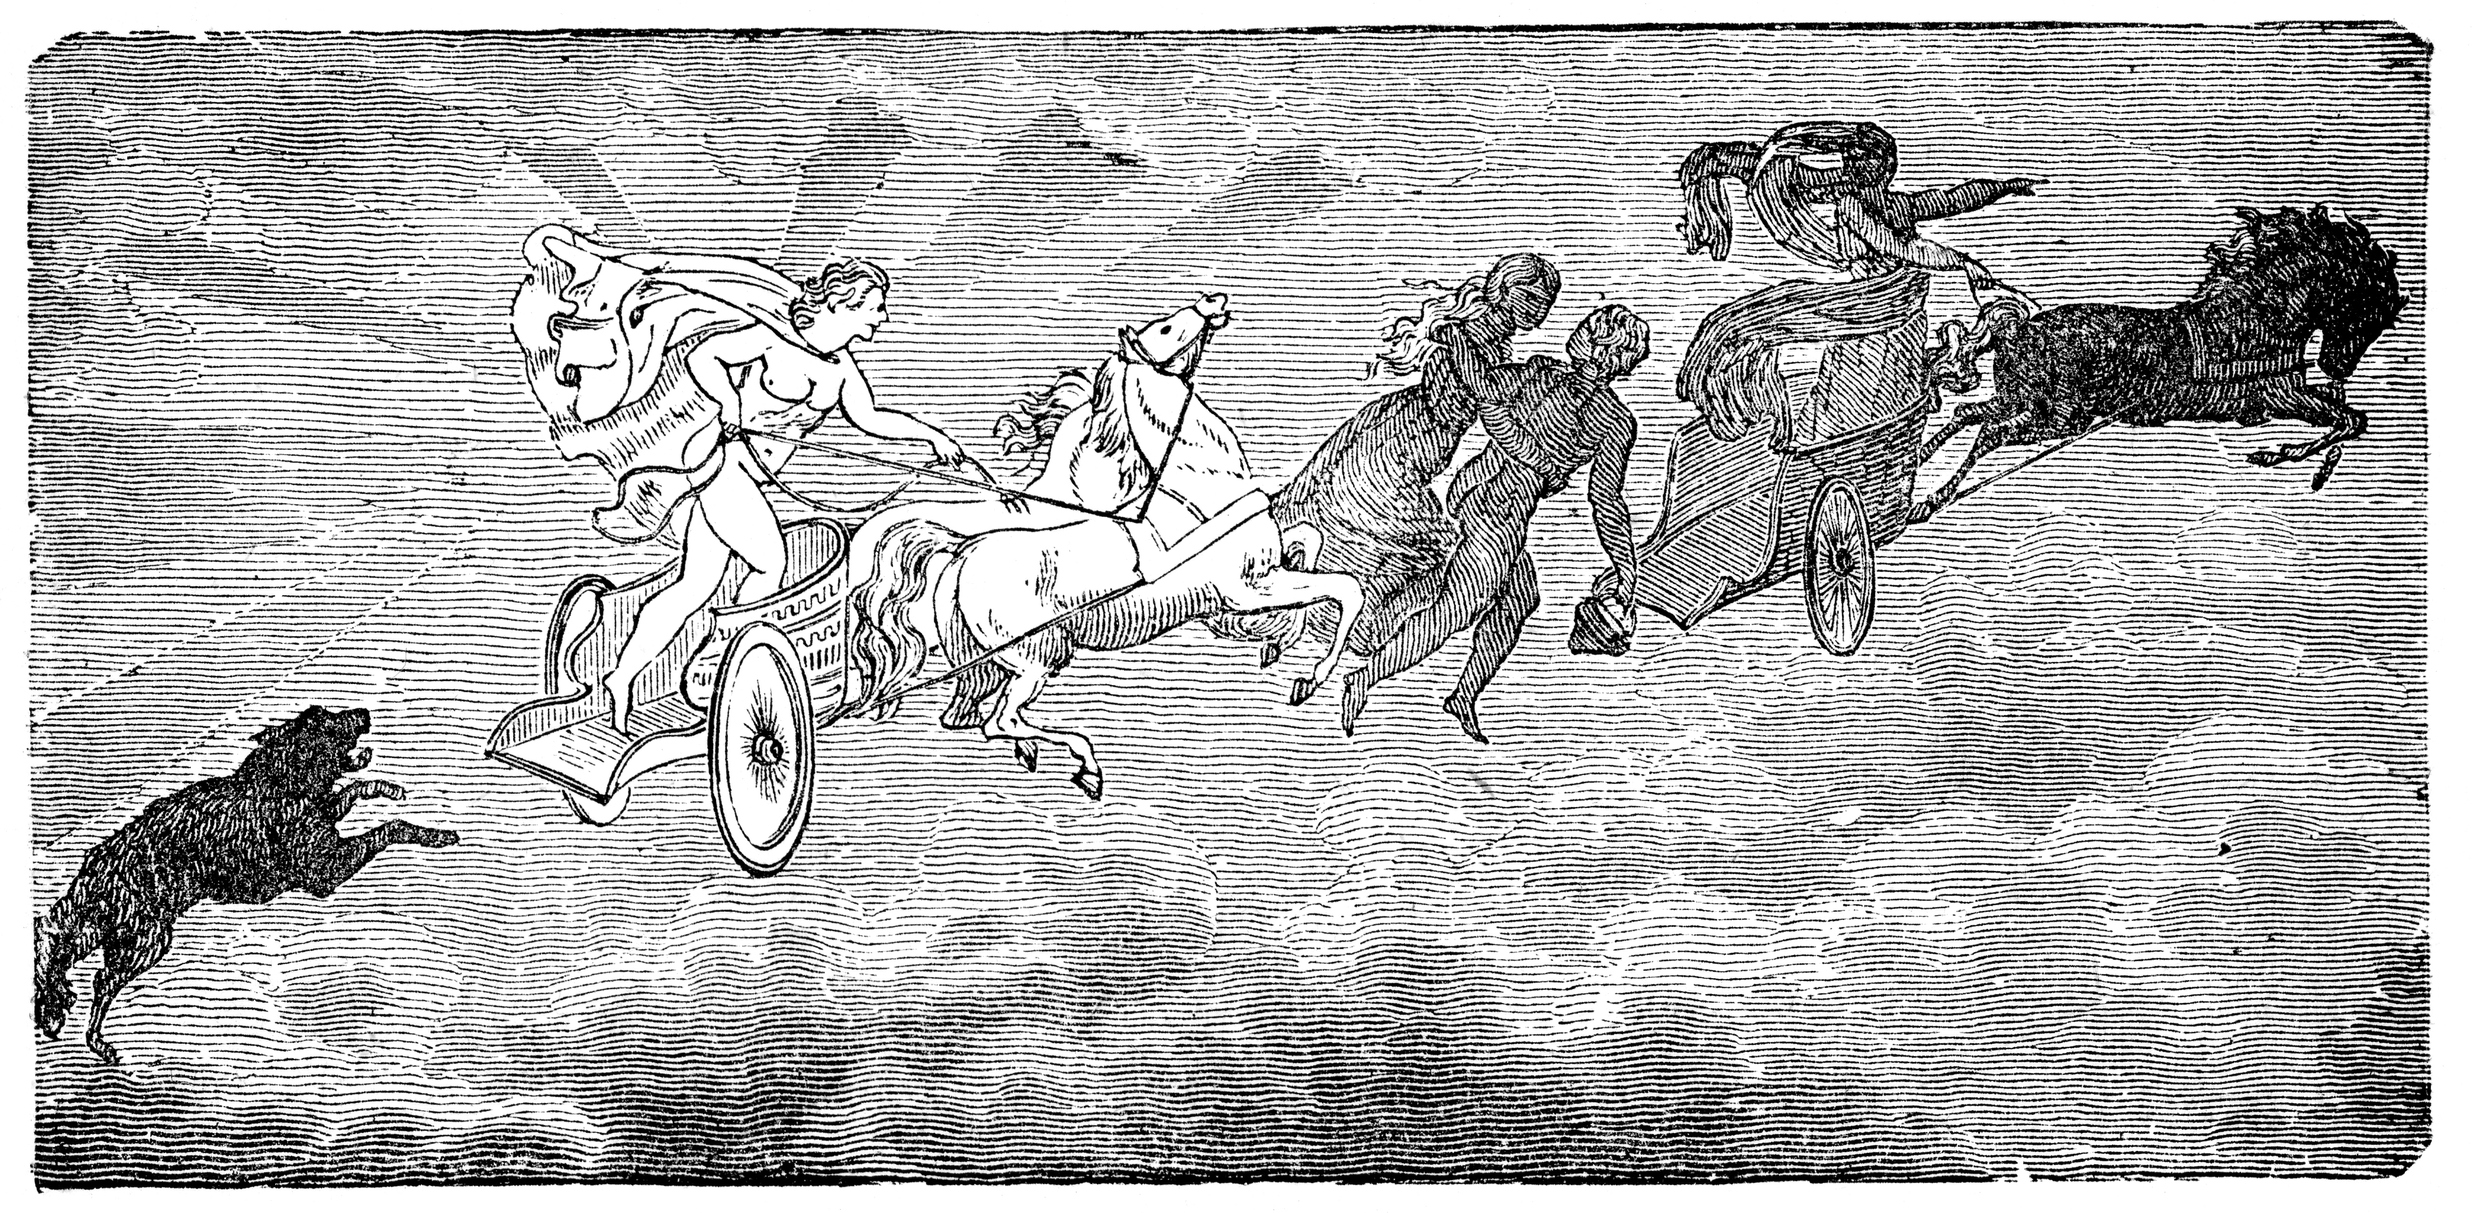 Vintage engraving from 1882 of the moon chariot driven by the God Mani from Norse mythology